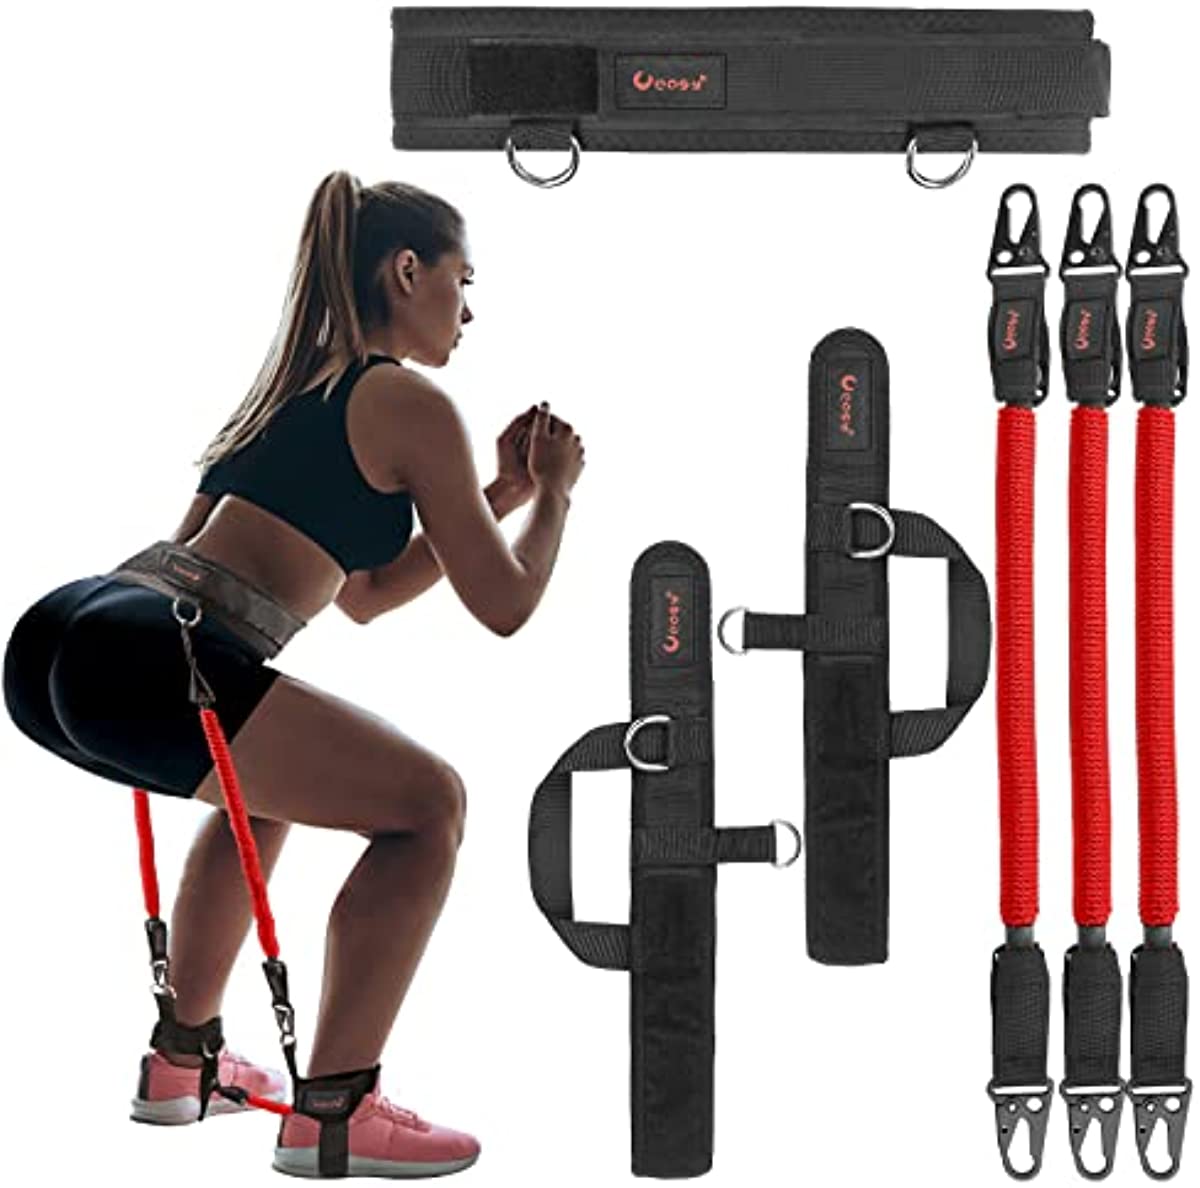 Ueasy Vertical Jumping Trainer Equipment Leg Resistance Bands Leg Strength Speed Muscle Fitness Workout for Basketball Volleyball Football Tennis Taekwondo Boxing Leg Agility Training